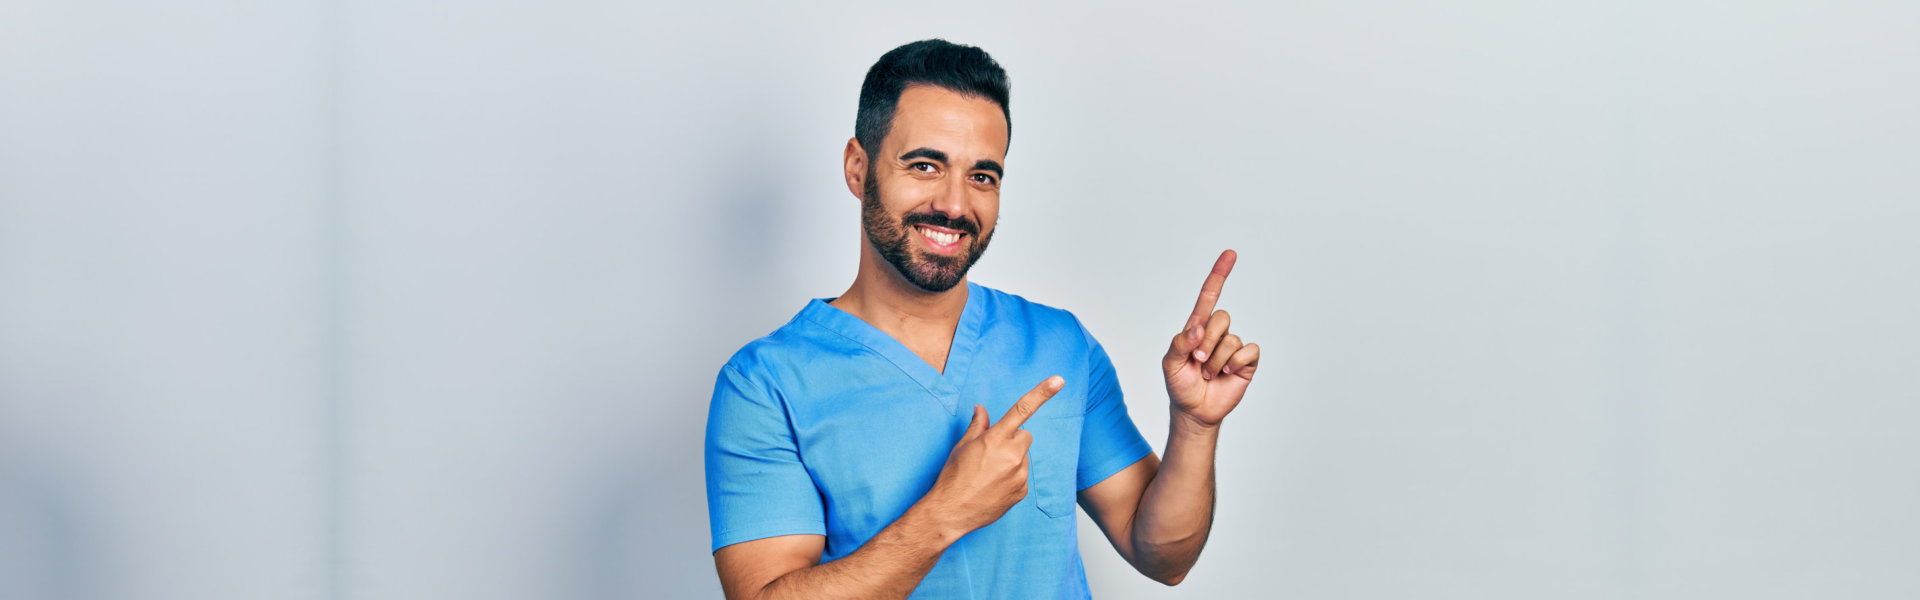 Handsome hispanic man with beard wearing blue male nurse uniform smiling and looking at the camera